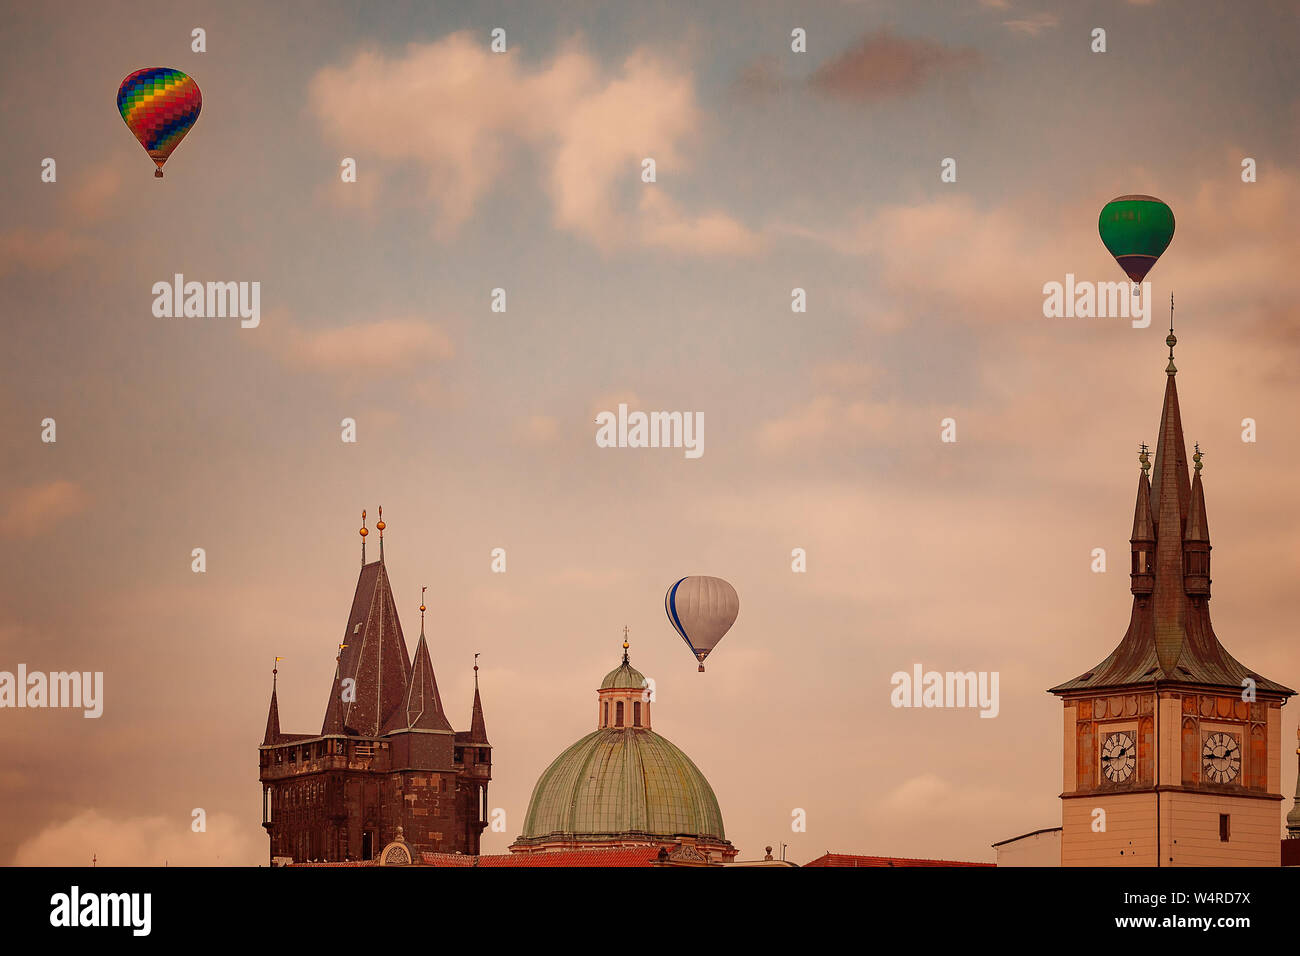 Balloons over Prague roofs and towers Stock Photo